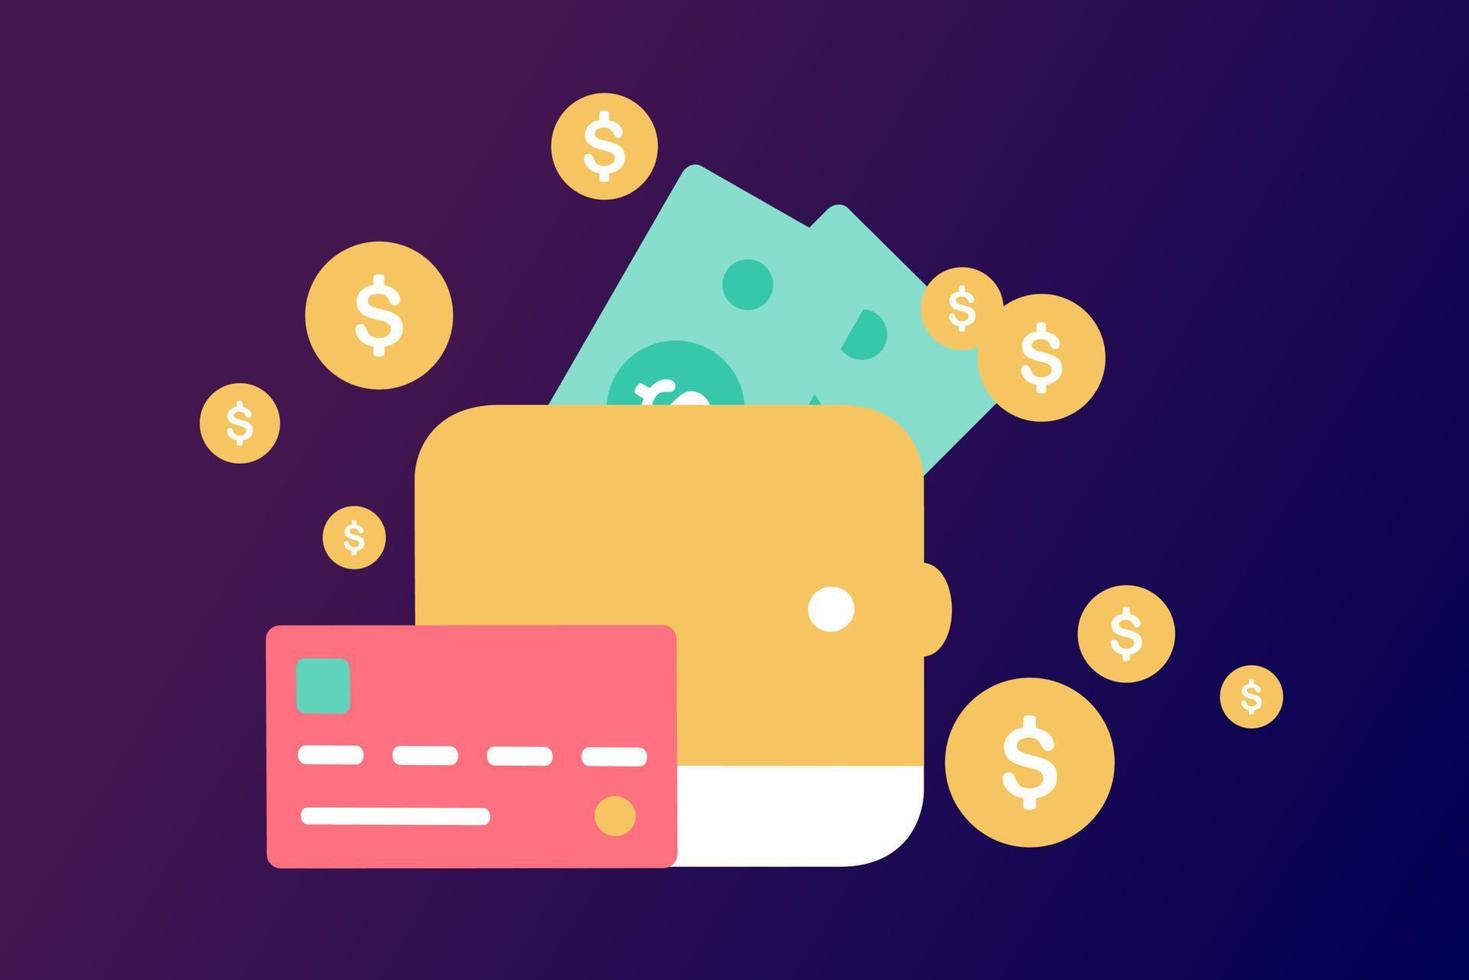 Bill payment with credit card for online shopping. Concept of payment processing, financial transactions, transfer, bank card, e-wallet for buying process, monetary currencies. Vector illustration.